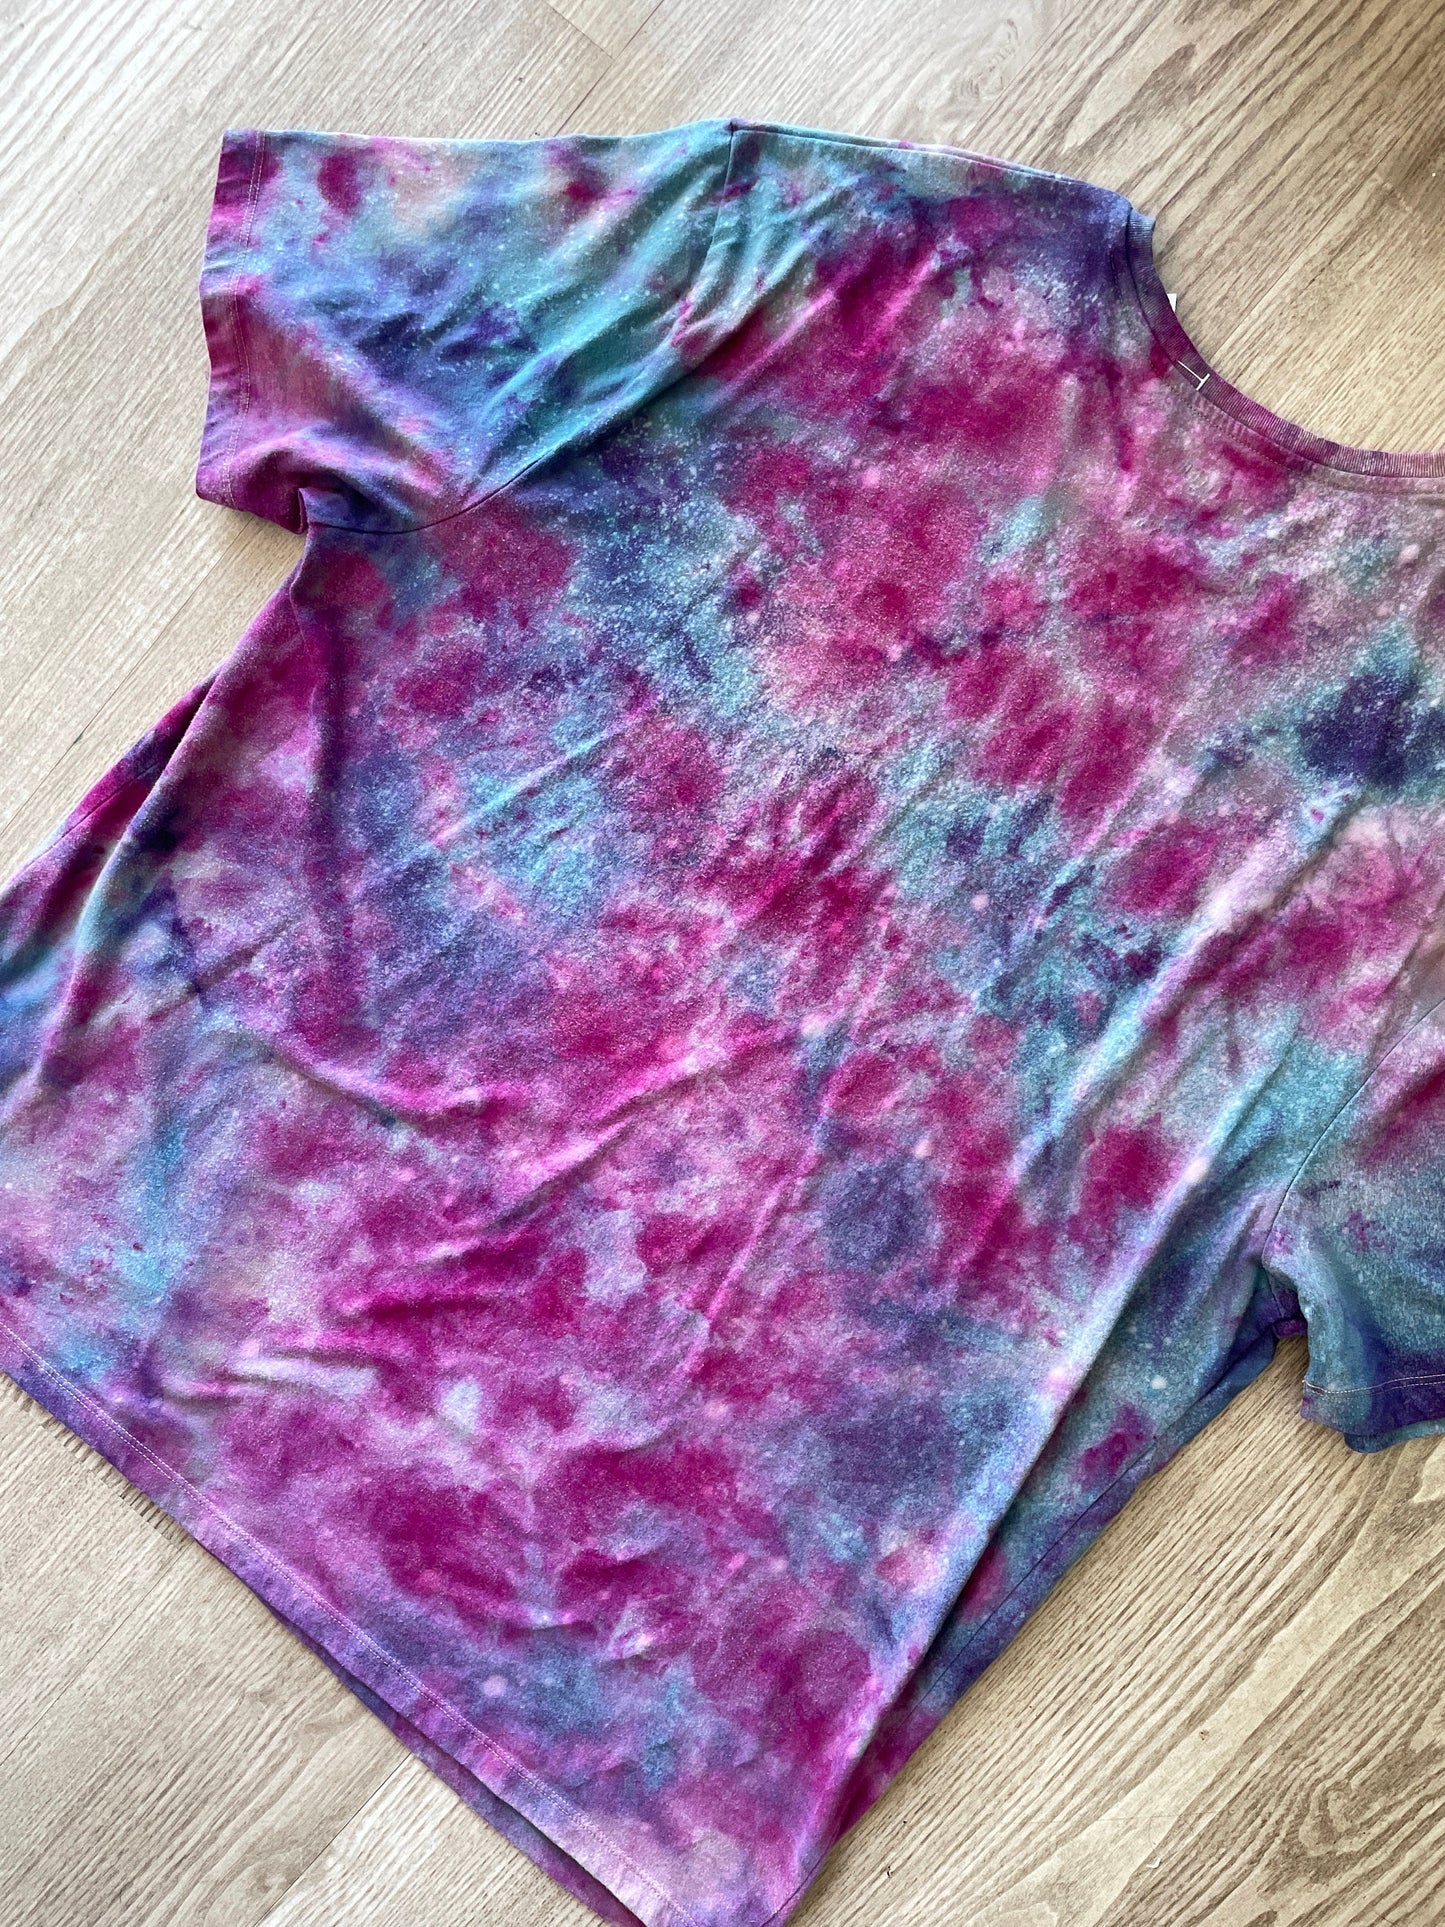 2XL Men's Handmade Galaxy Tie Dye Short Sleeve T-Shirt | One-Of-a-Kind Upcycled Blue and Purple Ice Dye Top